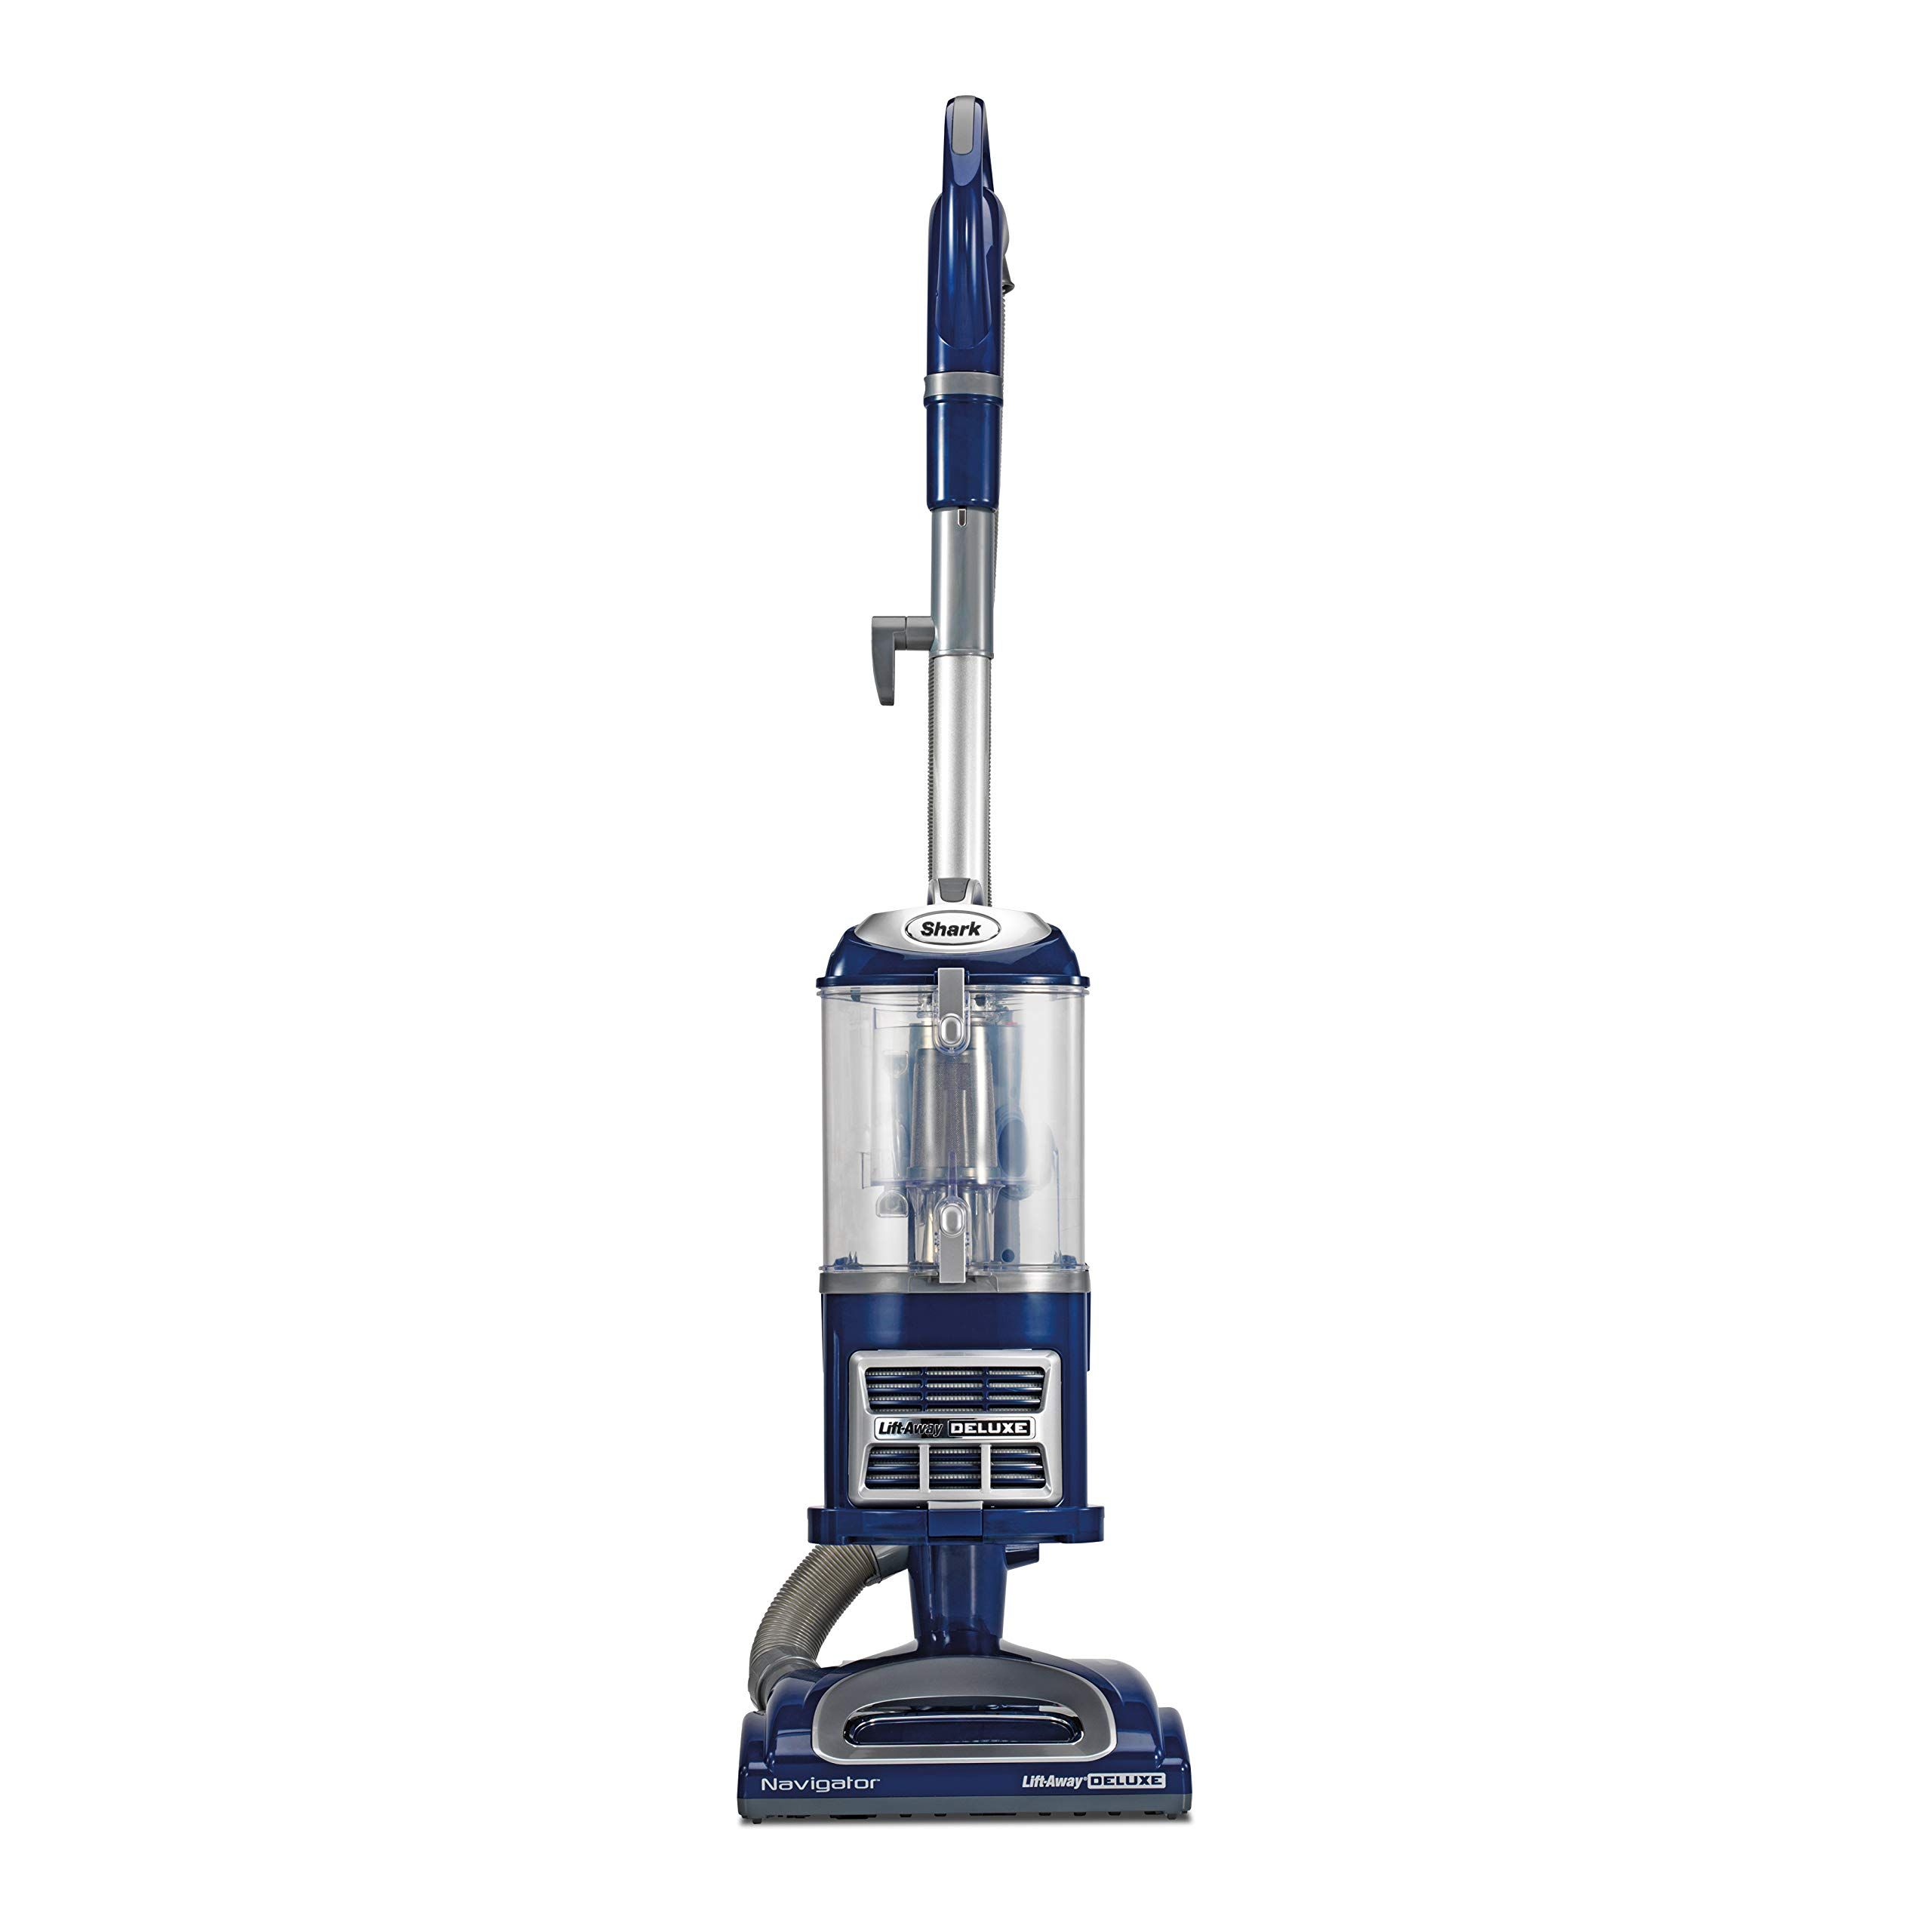 Shark NV360 Navigator Lift-Away Deluxe Upright Vacuum with Large Dust Cup Capacity, HEPA Filter, Swivel Steering, Upholstery Tool & Crevice Tool, Blue | Amazon (US)